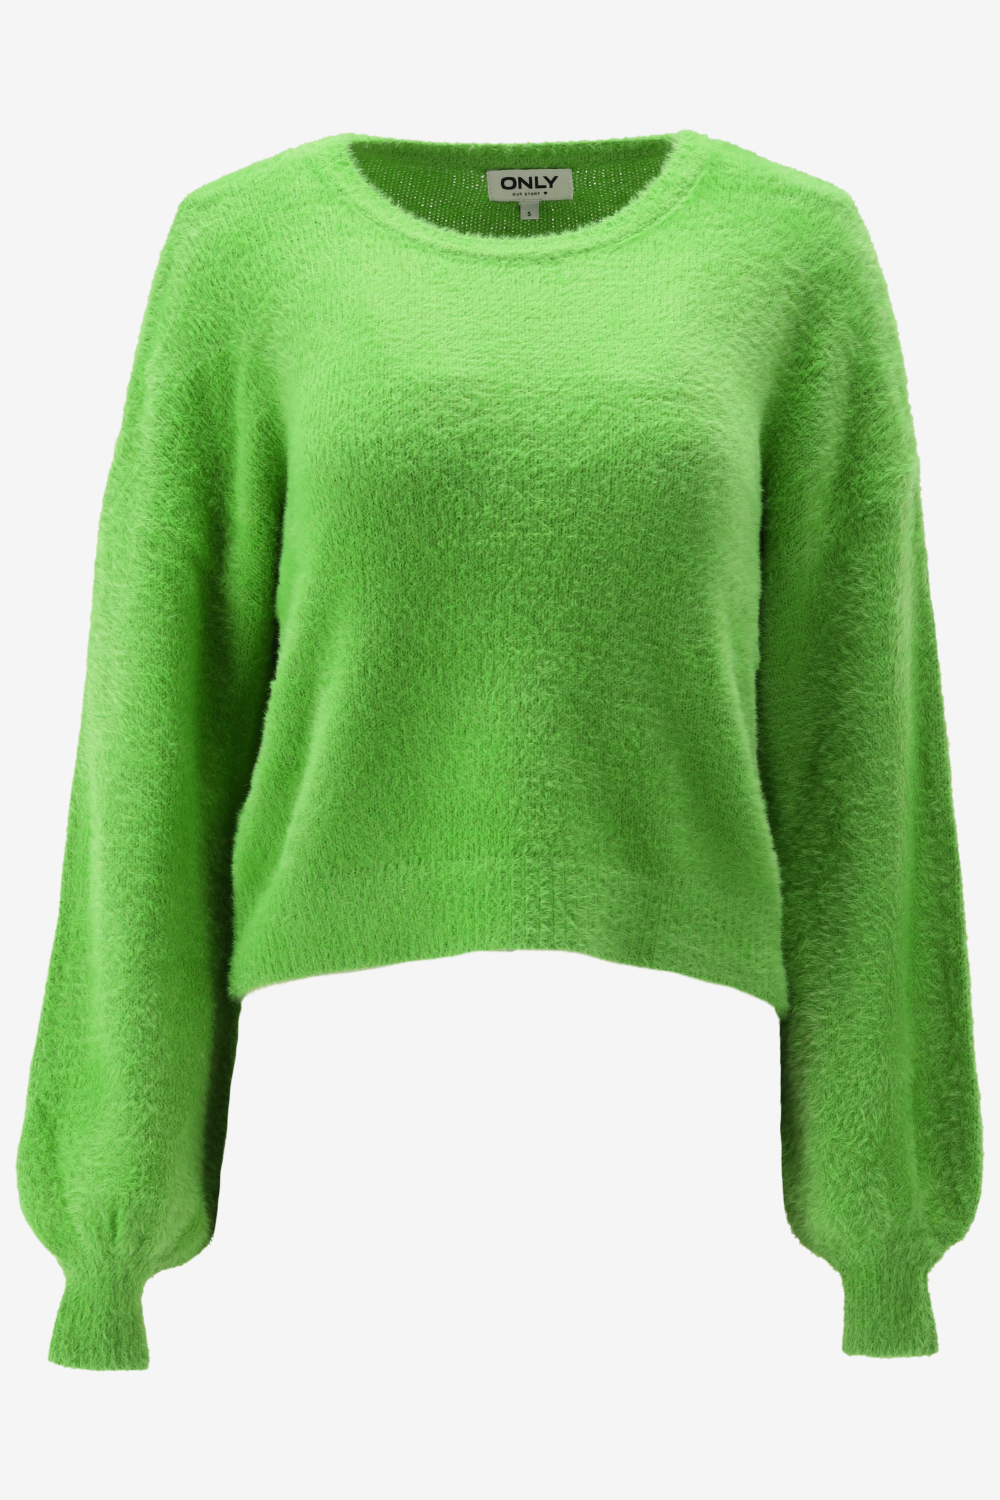 Only Piumo L/s Pullover Island Green GROEN XS